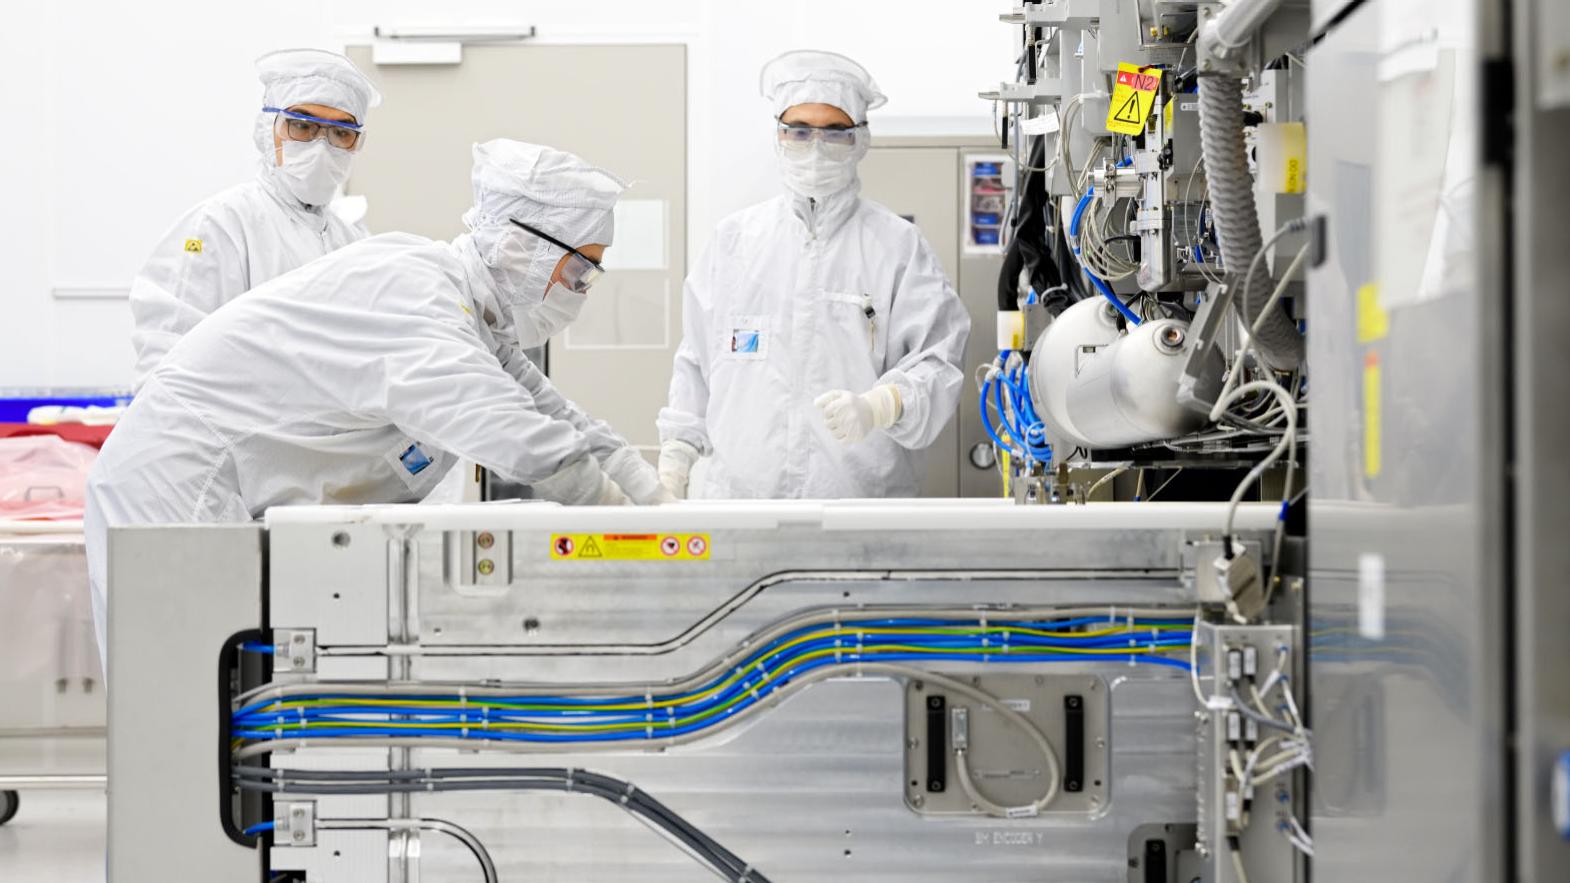 Employees from both ASML and SMT work together on EUV 